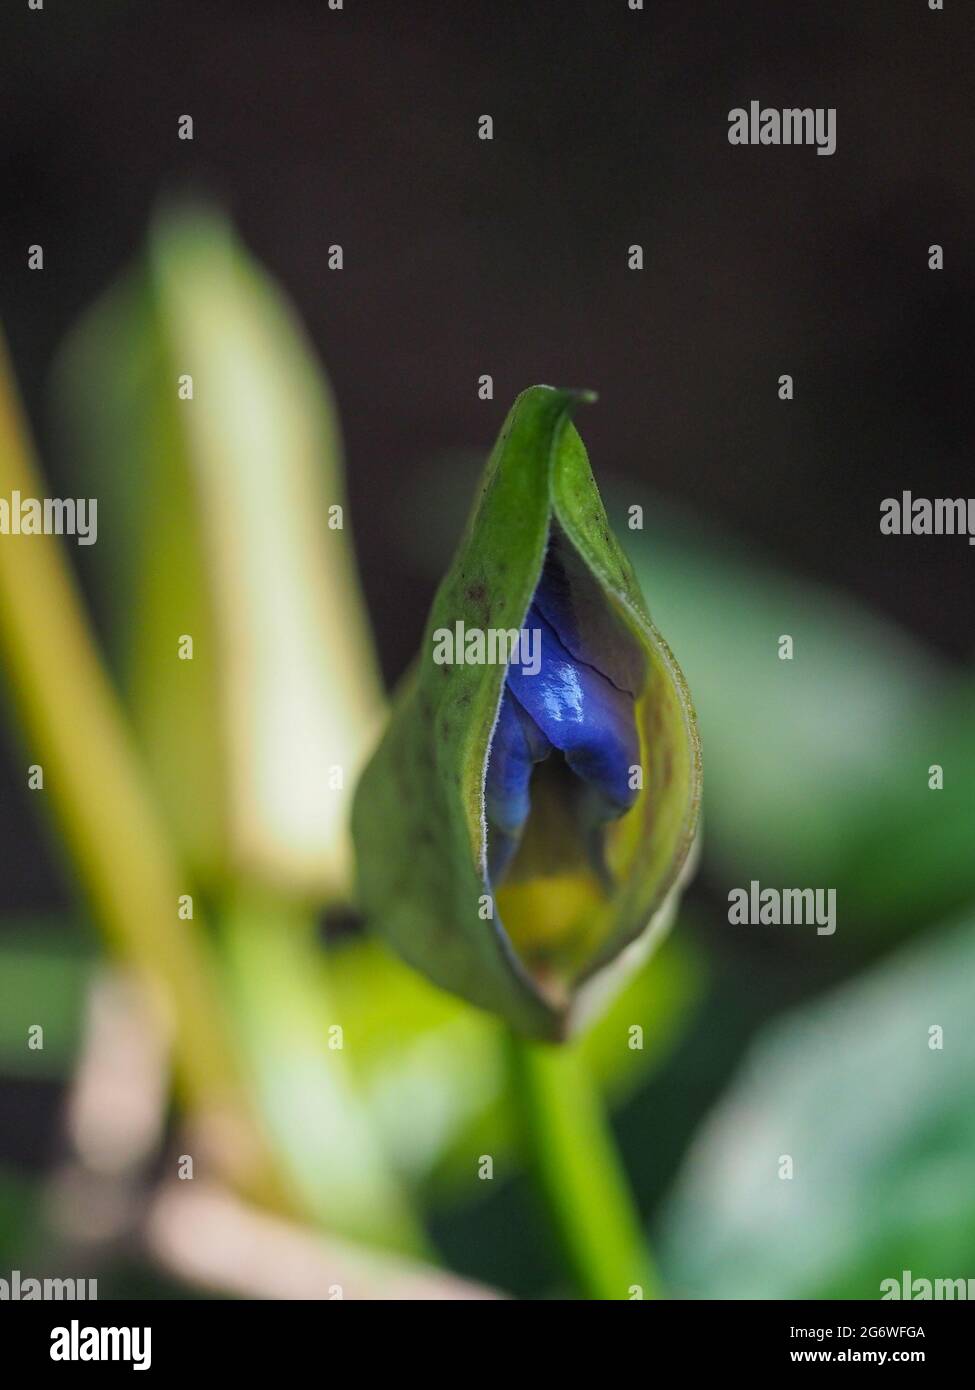 Macro, Blue Skyflower bud opening, blue petals still tightly wrapped and seen through the outer green bracts, Blurred green and black background Stock Photo